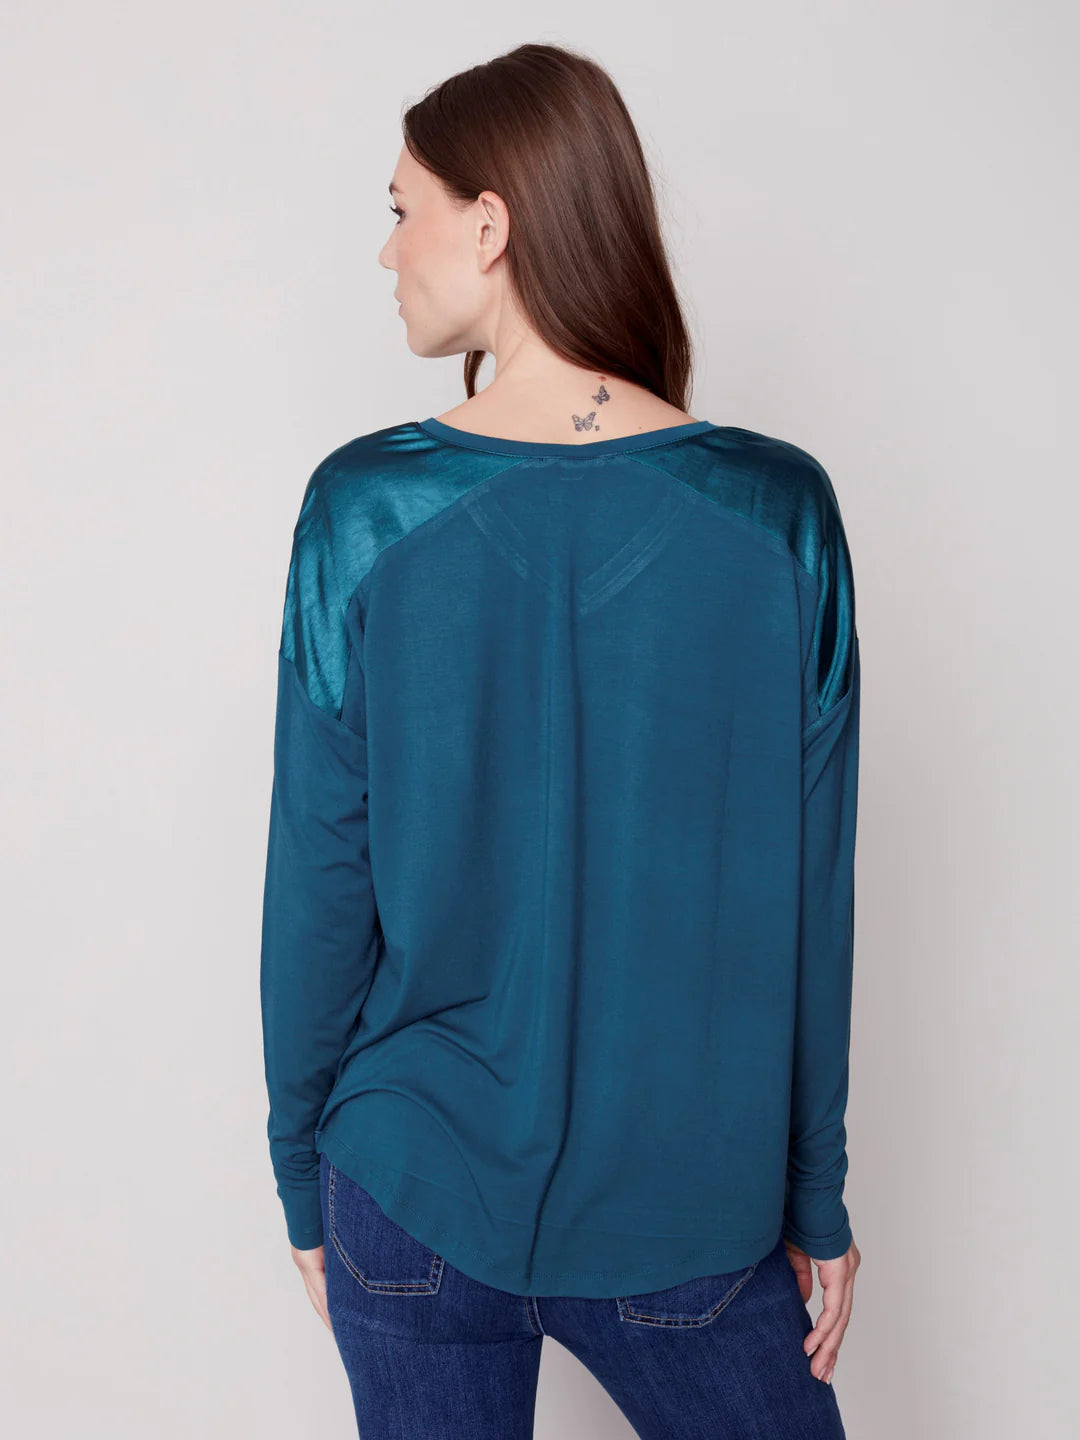 Satin and Jersey Knit Top - Emerald Jacket Charlie B   